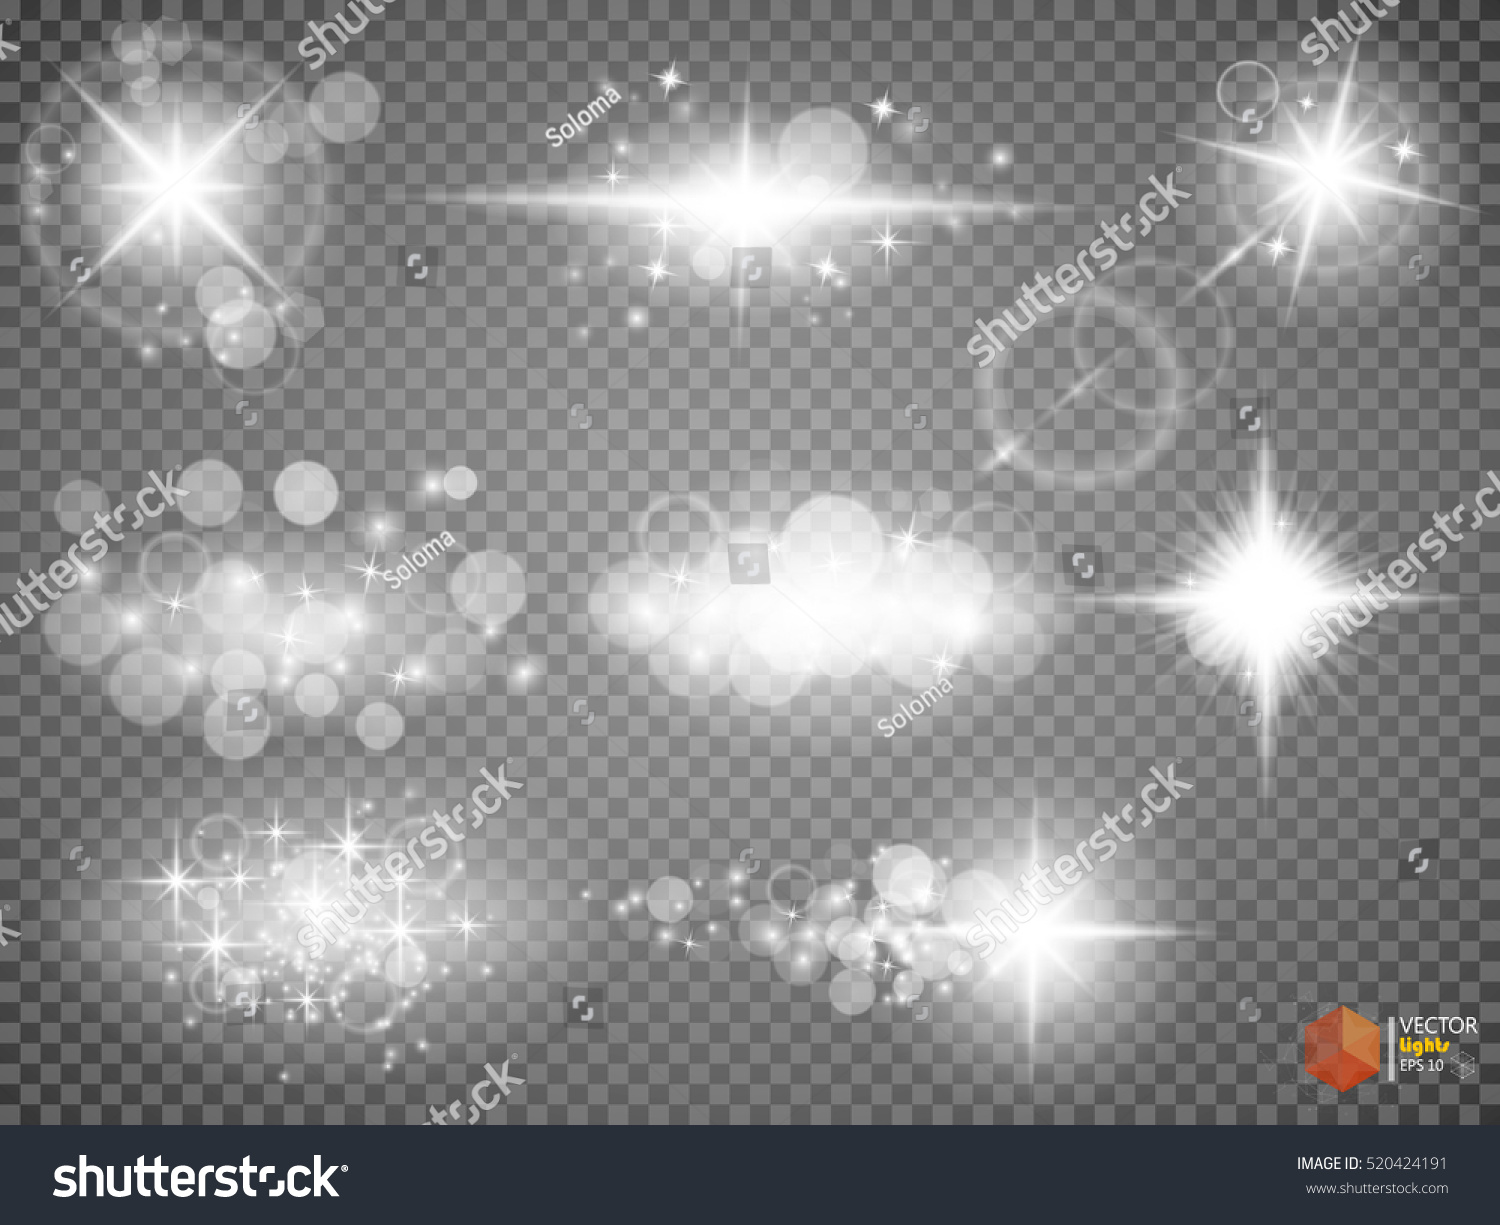 Silver glitter bokeh lights and tinsel. Bright star, solar particles and sparks with glare effect on a transparent background #520424191